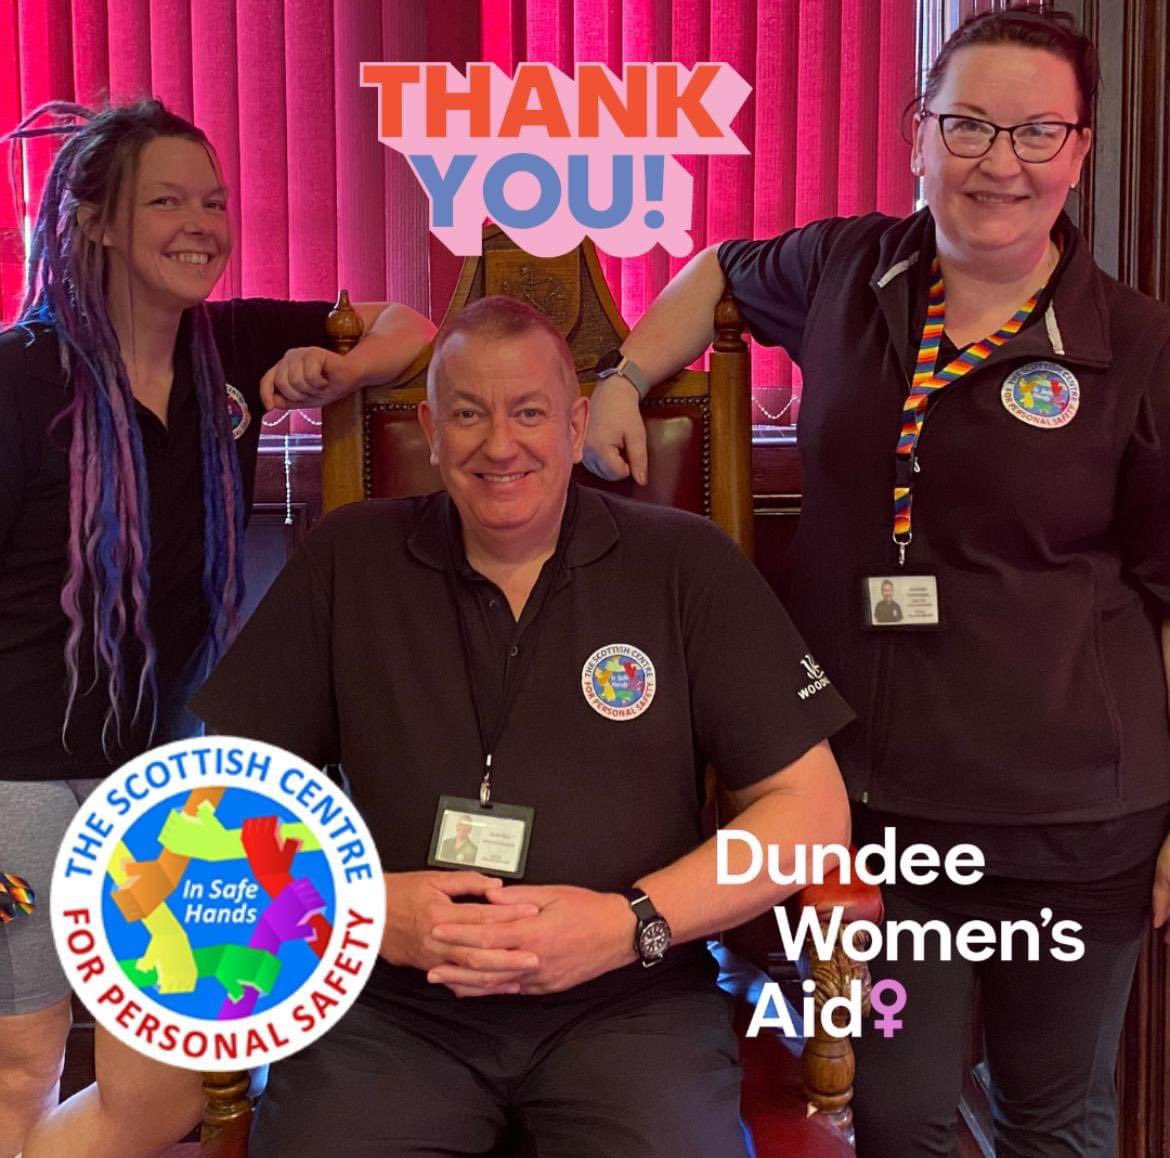 Wonderful feedback from @DundeeWomensAid; 
“Yesterday I went out alone for the first time in I don’t know how long and felt safe, I can’t tell you how valuable this training has been.”

#personalsafety #domesticabuse #genderbasedviolence #empowerment #empoweringsurvivors